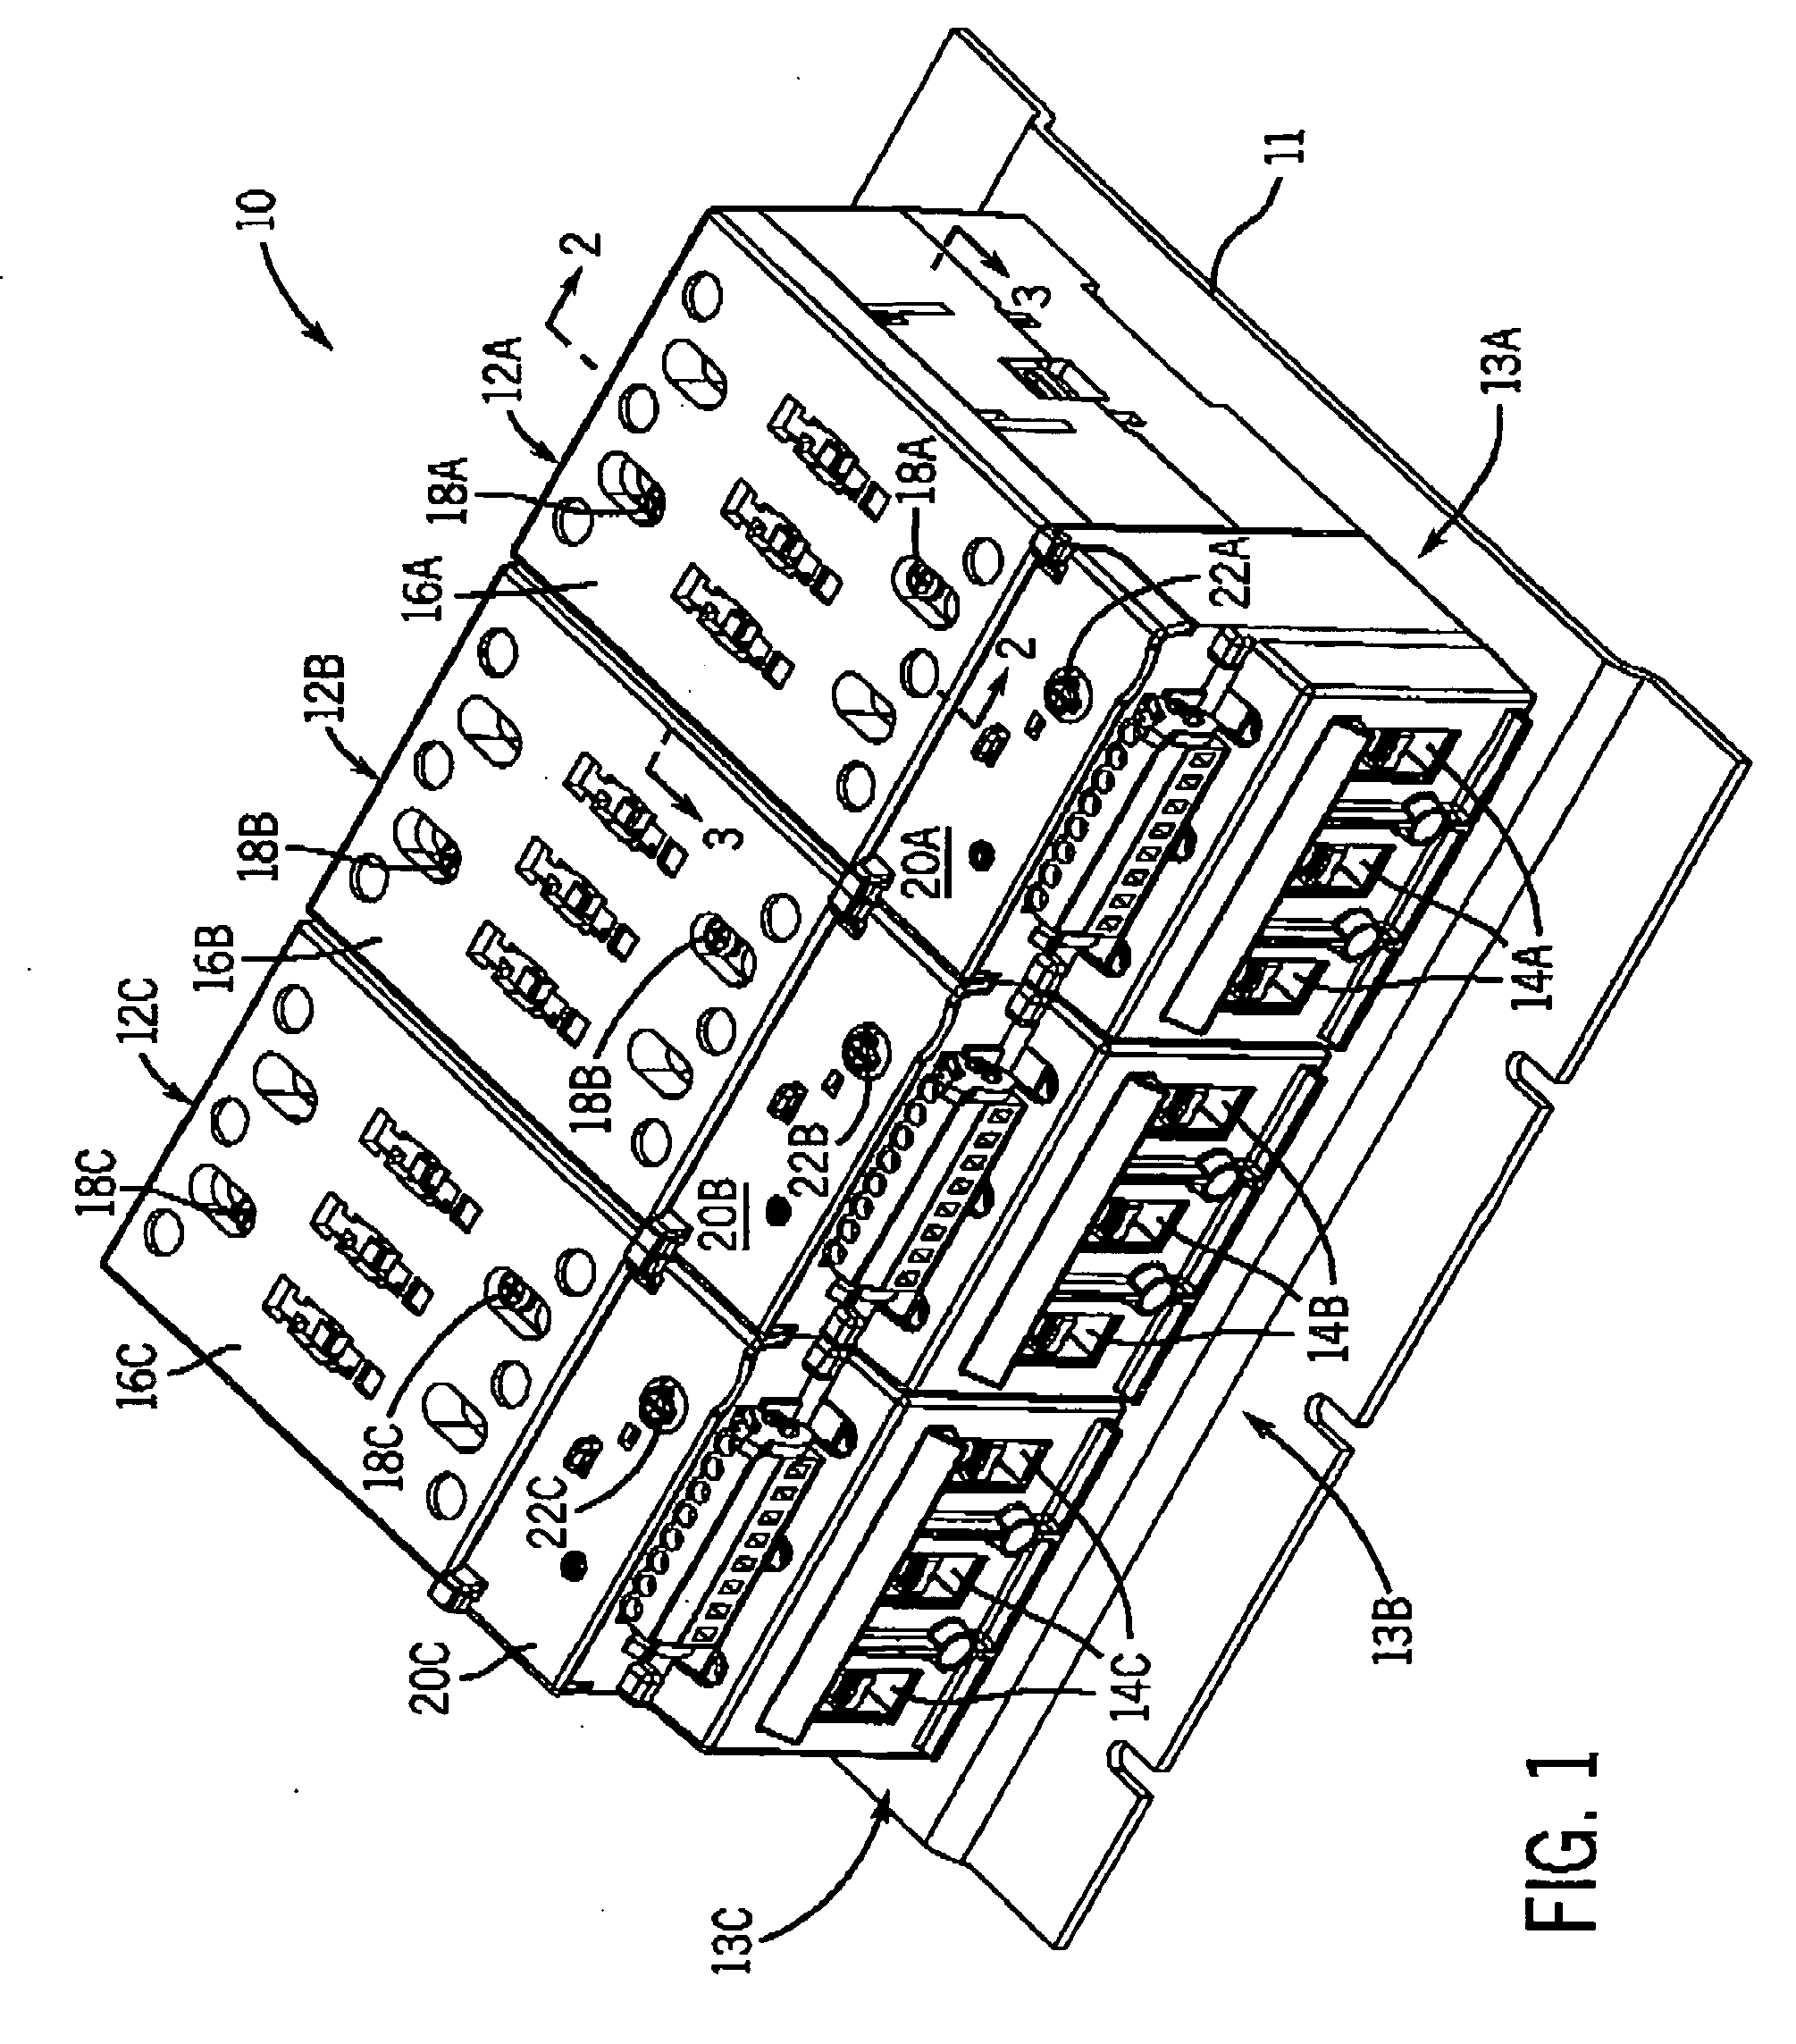 Modular contactor assembly having independently controllable contactors